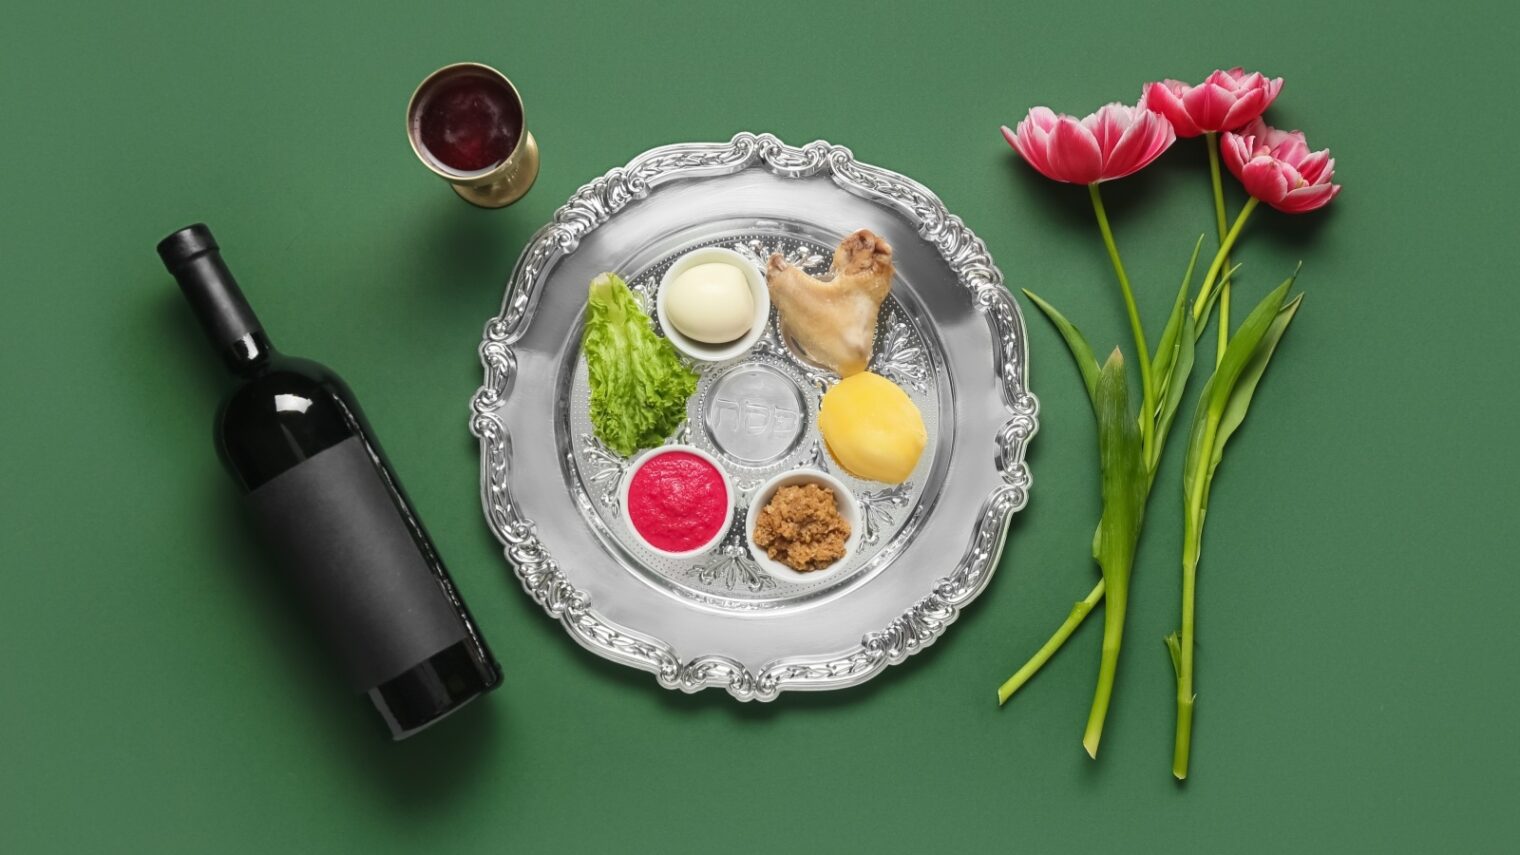 Future Seder plates are unlikely to look like this. Photo by Pixel Shot, via Shutterstock